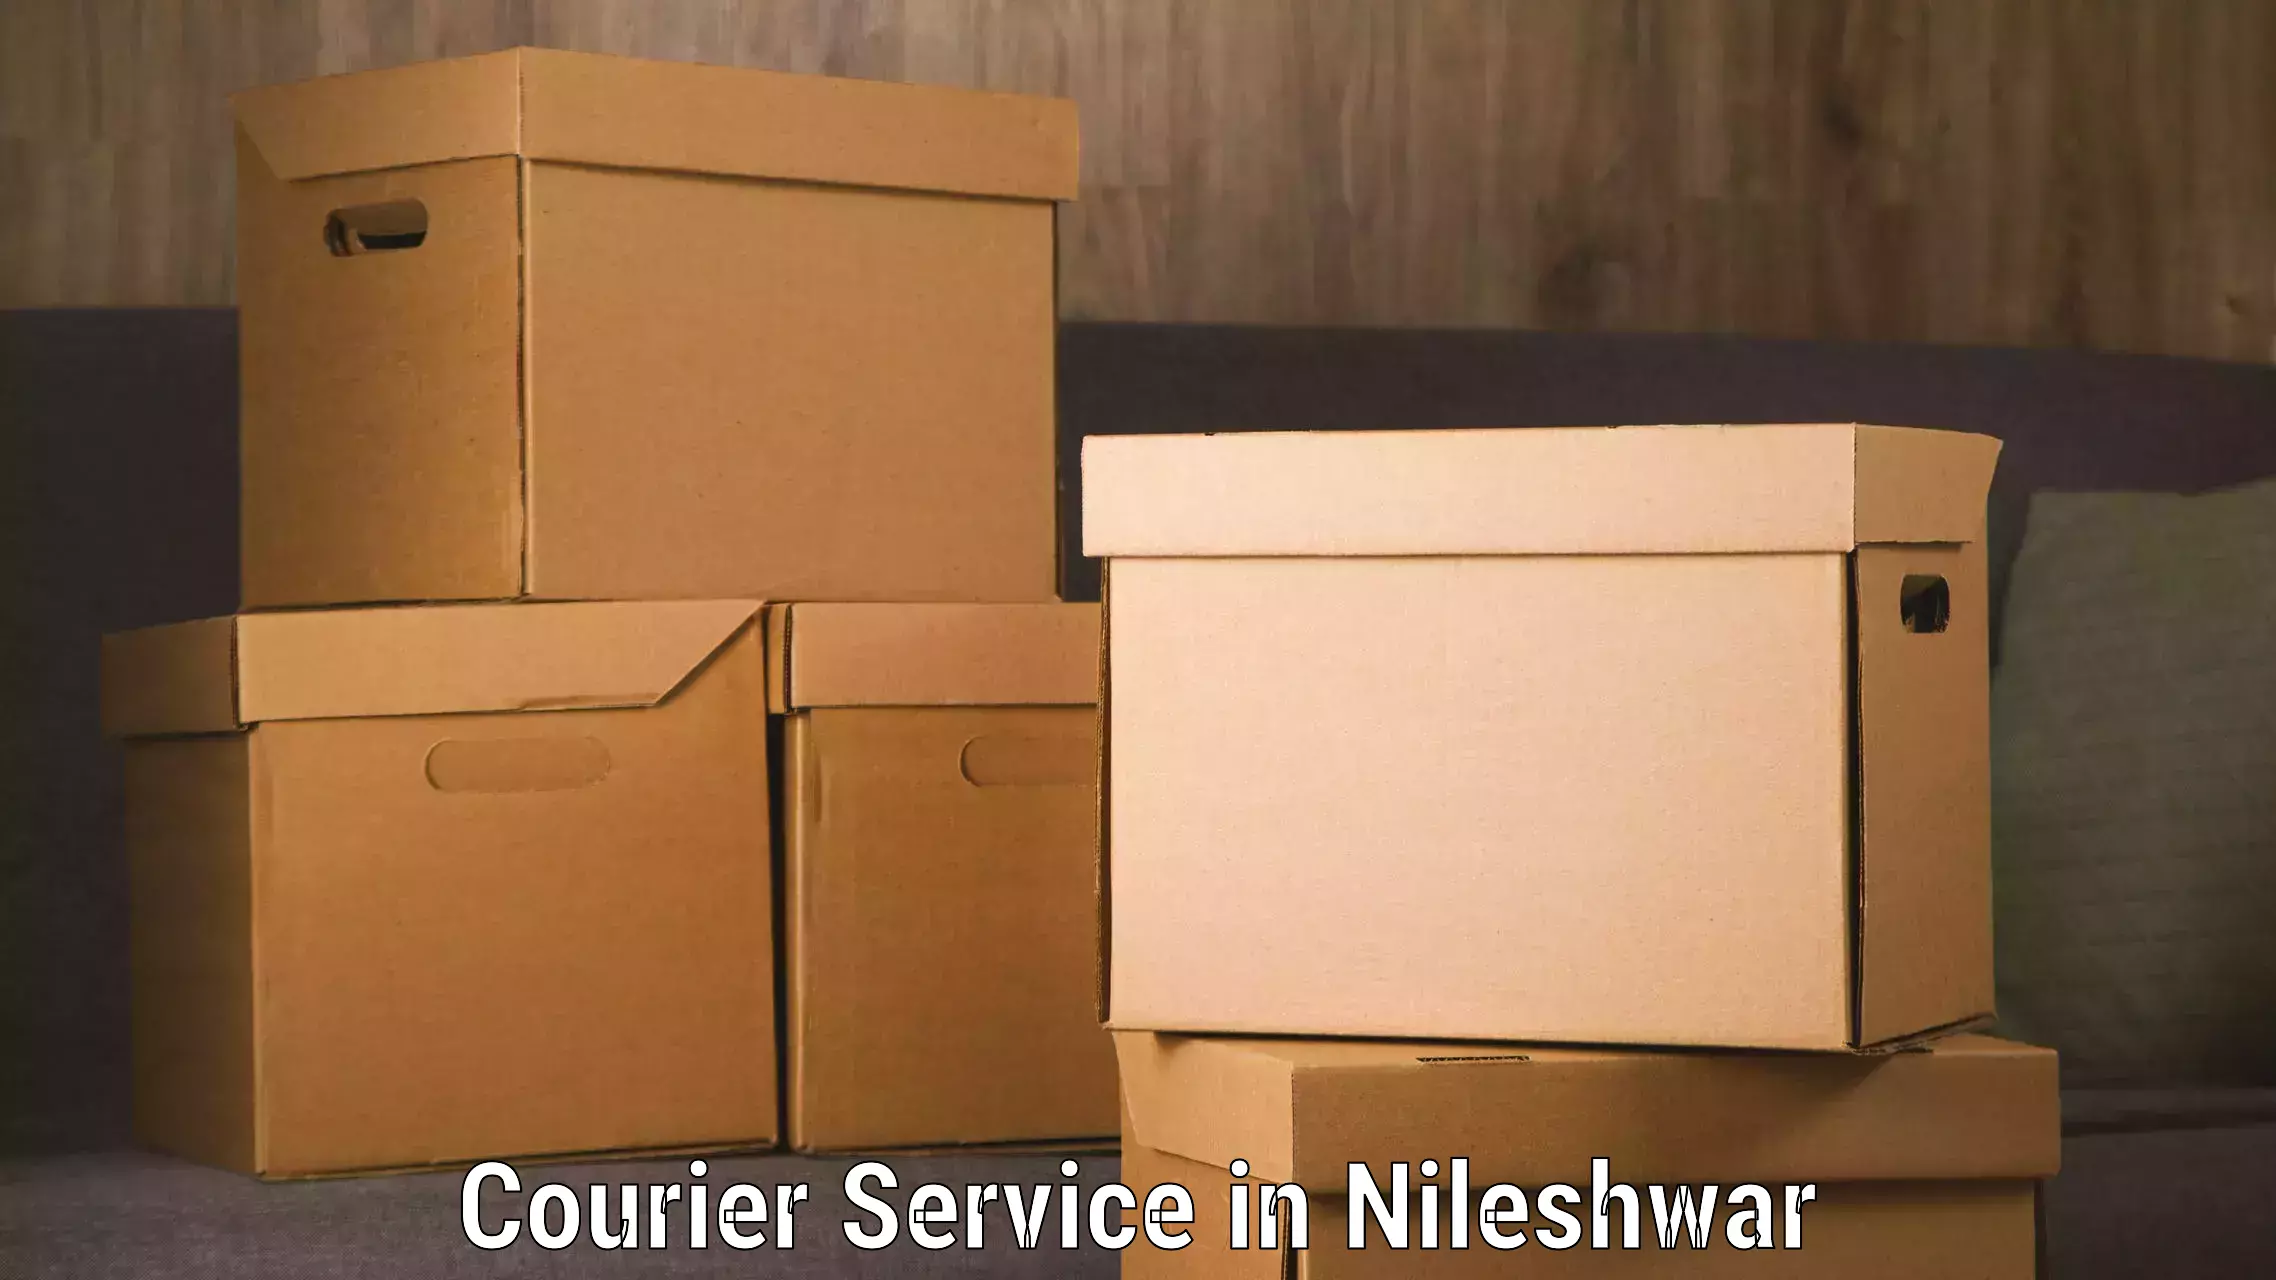 Rapid freight solutions in Nileshwar